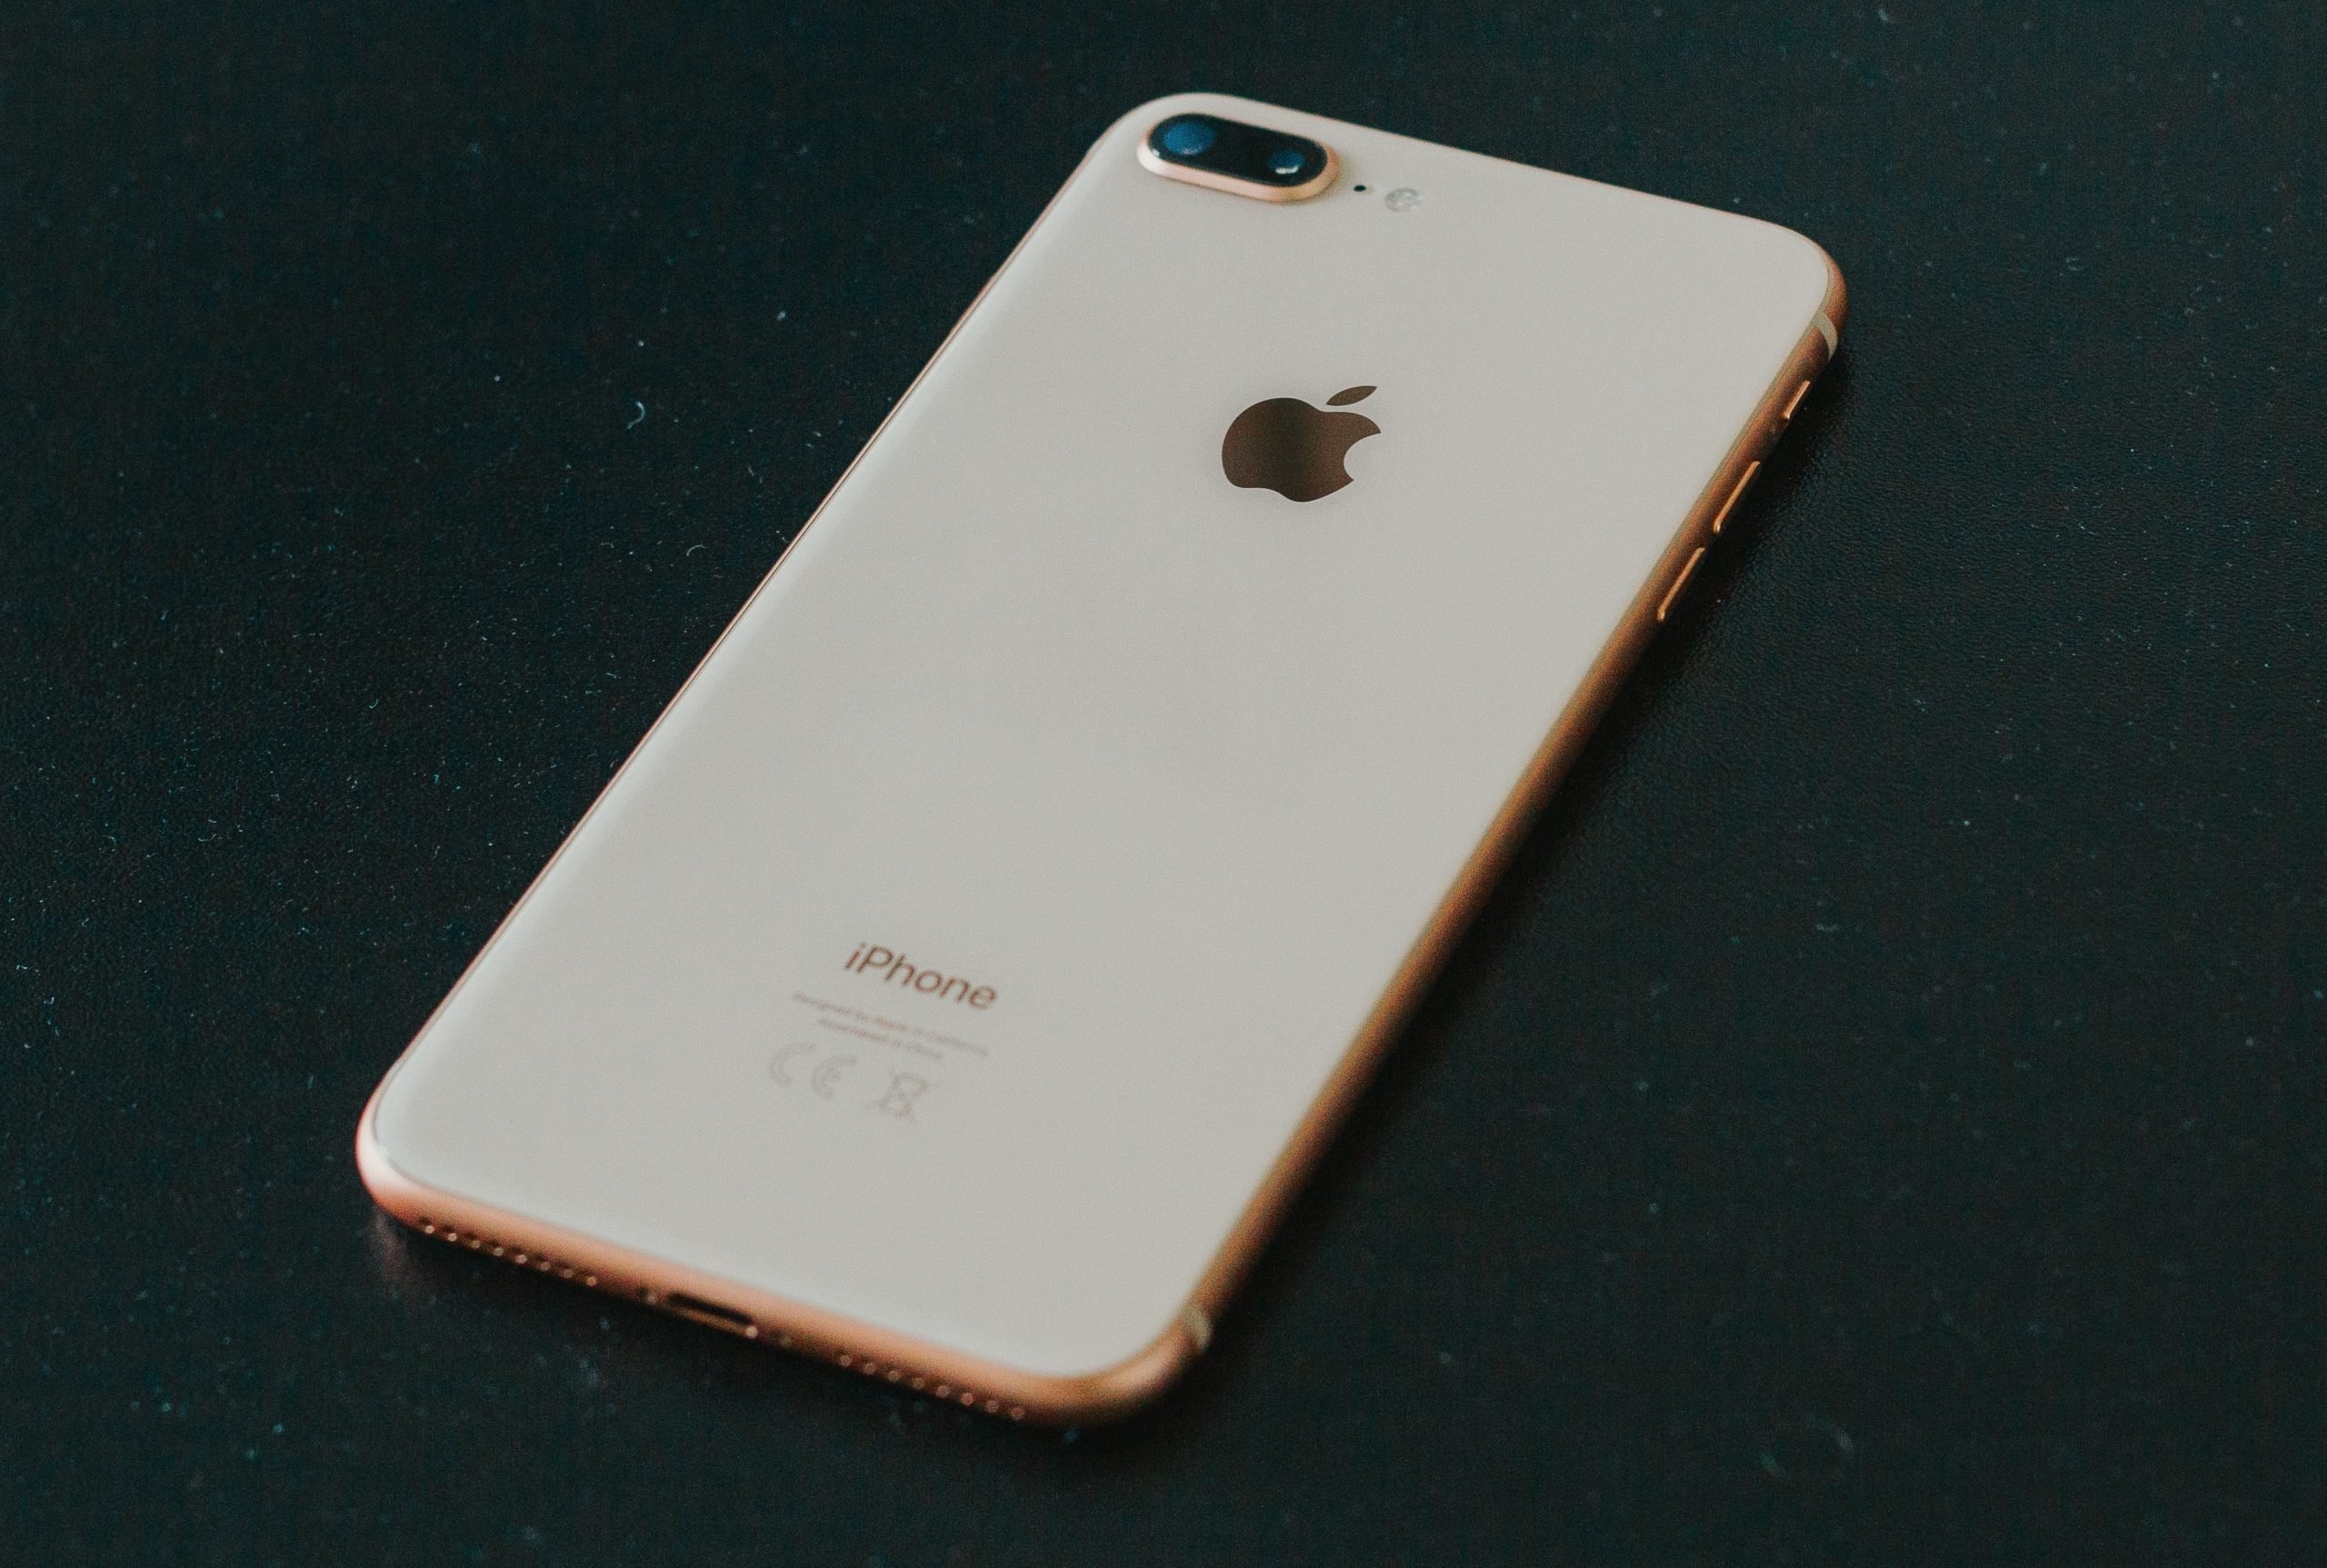 How much does the iPhone 8 Plus cost?